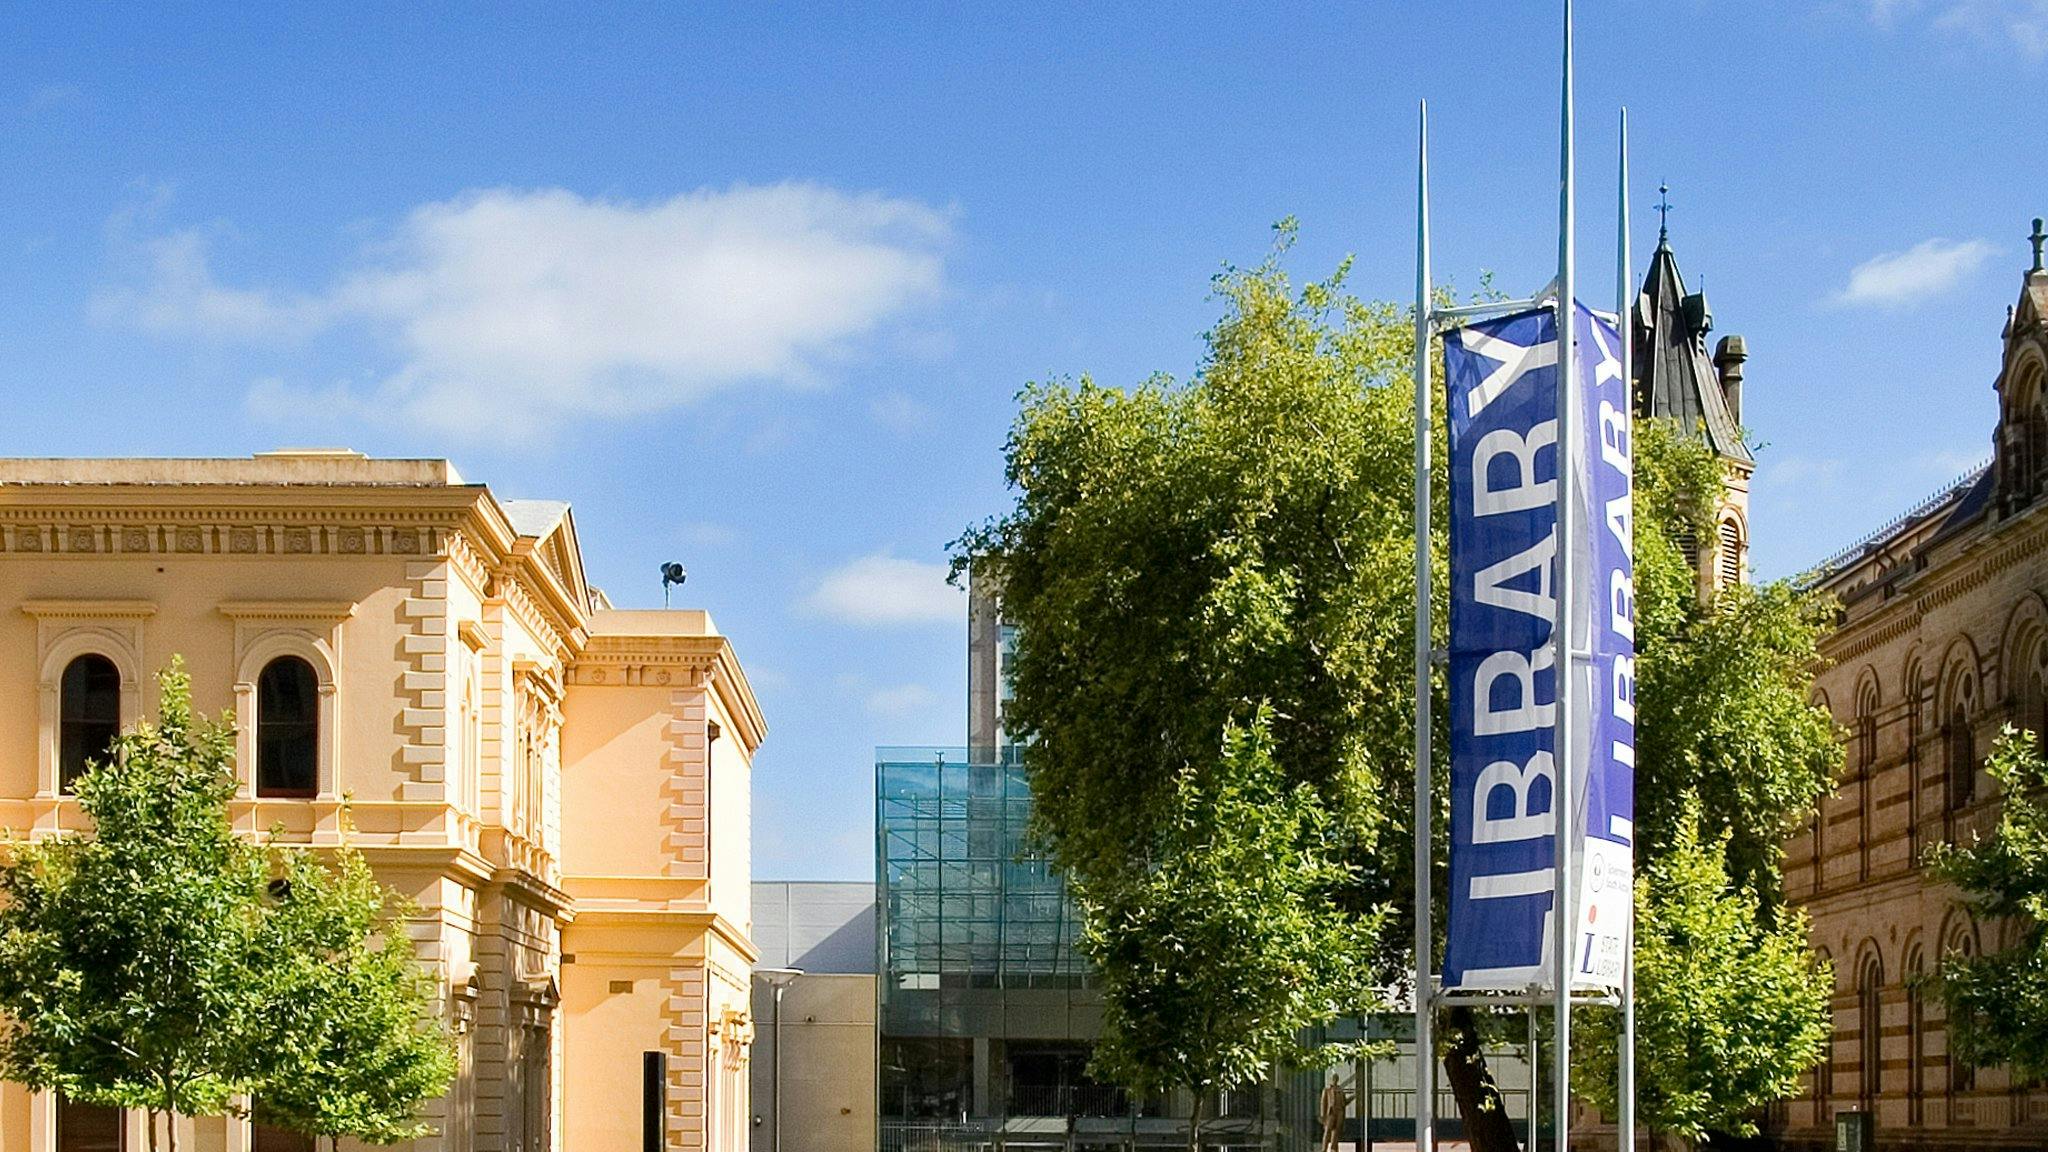 State Library Of South Australia Slider Image 2